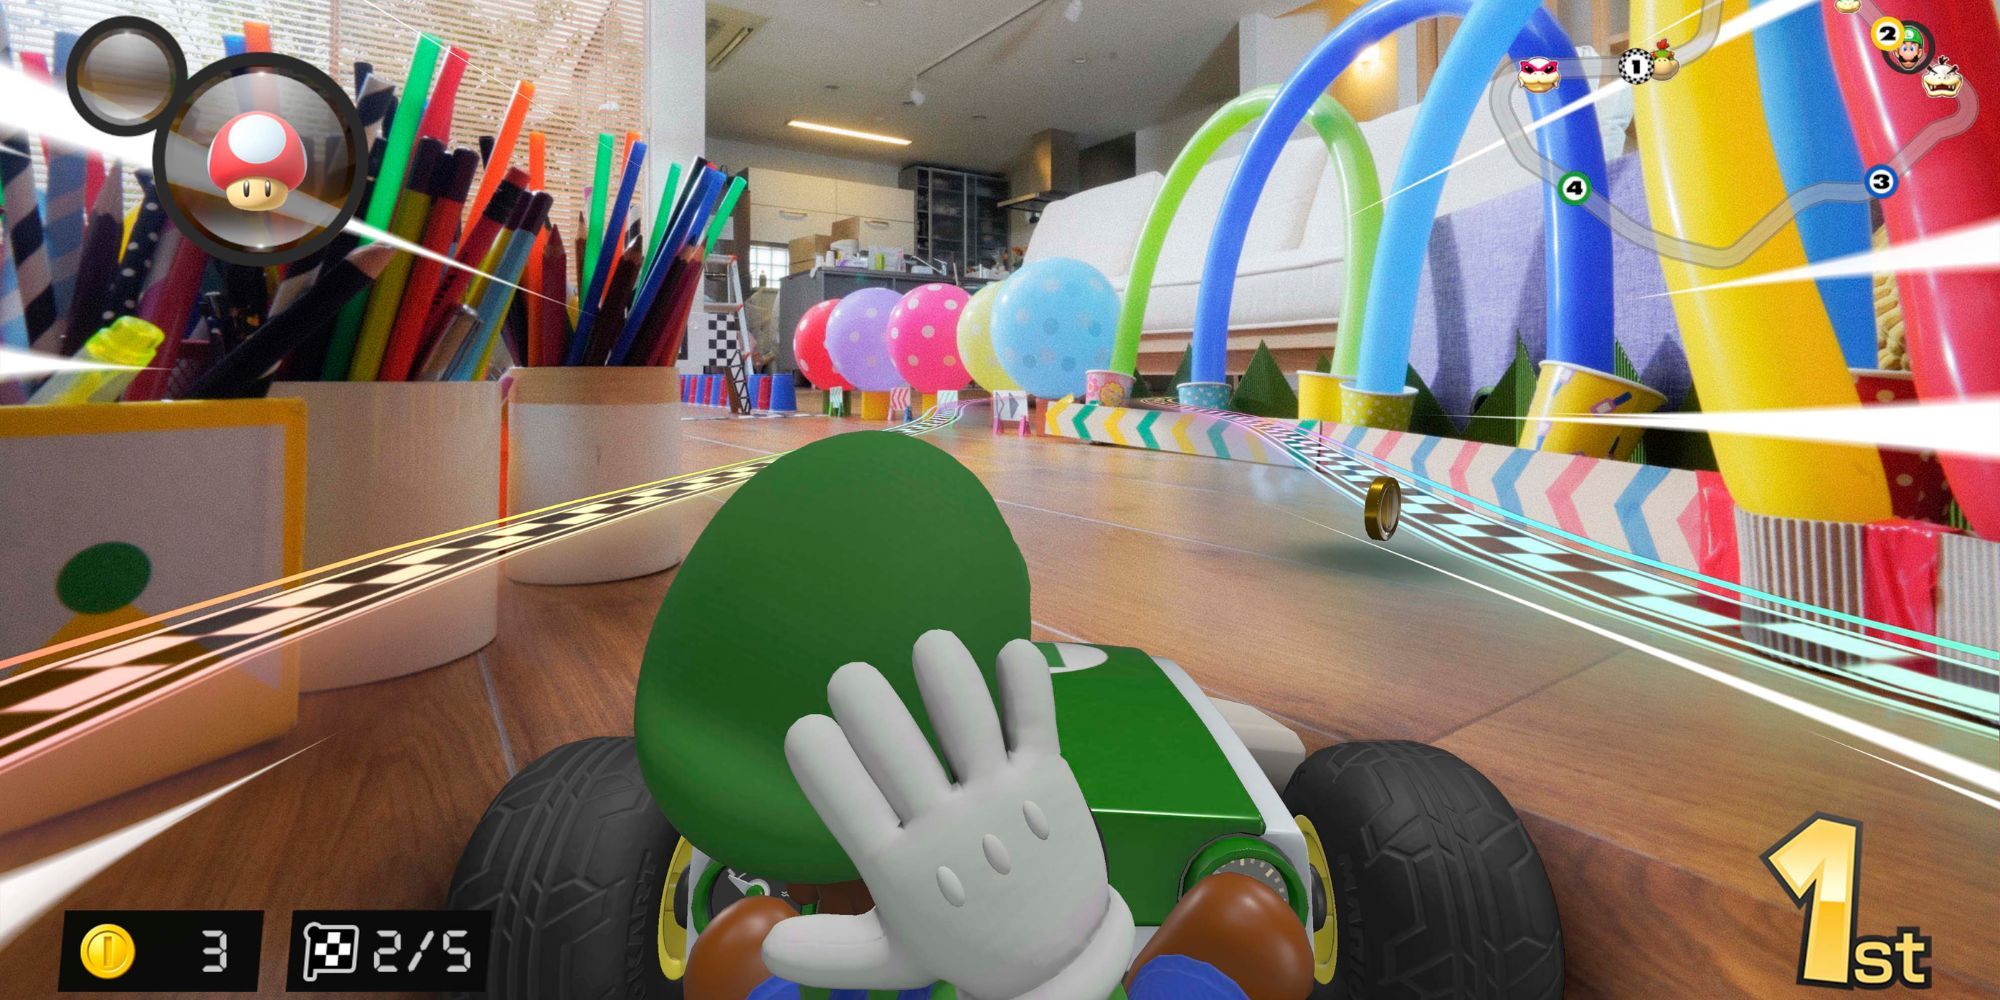 Luigi drives car in first place during a race past straws and pens